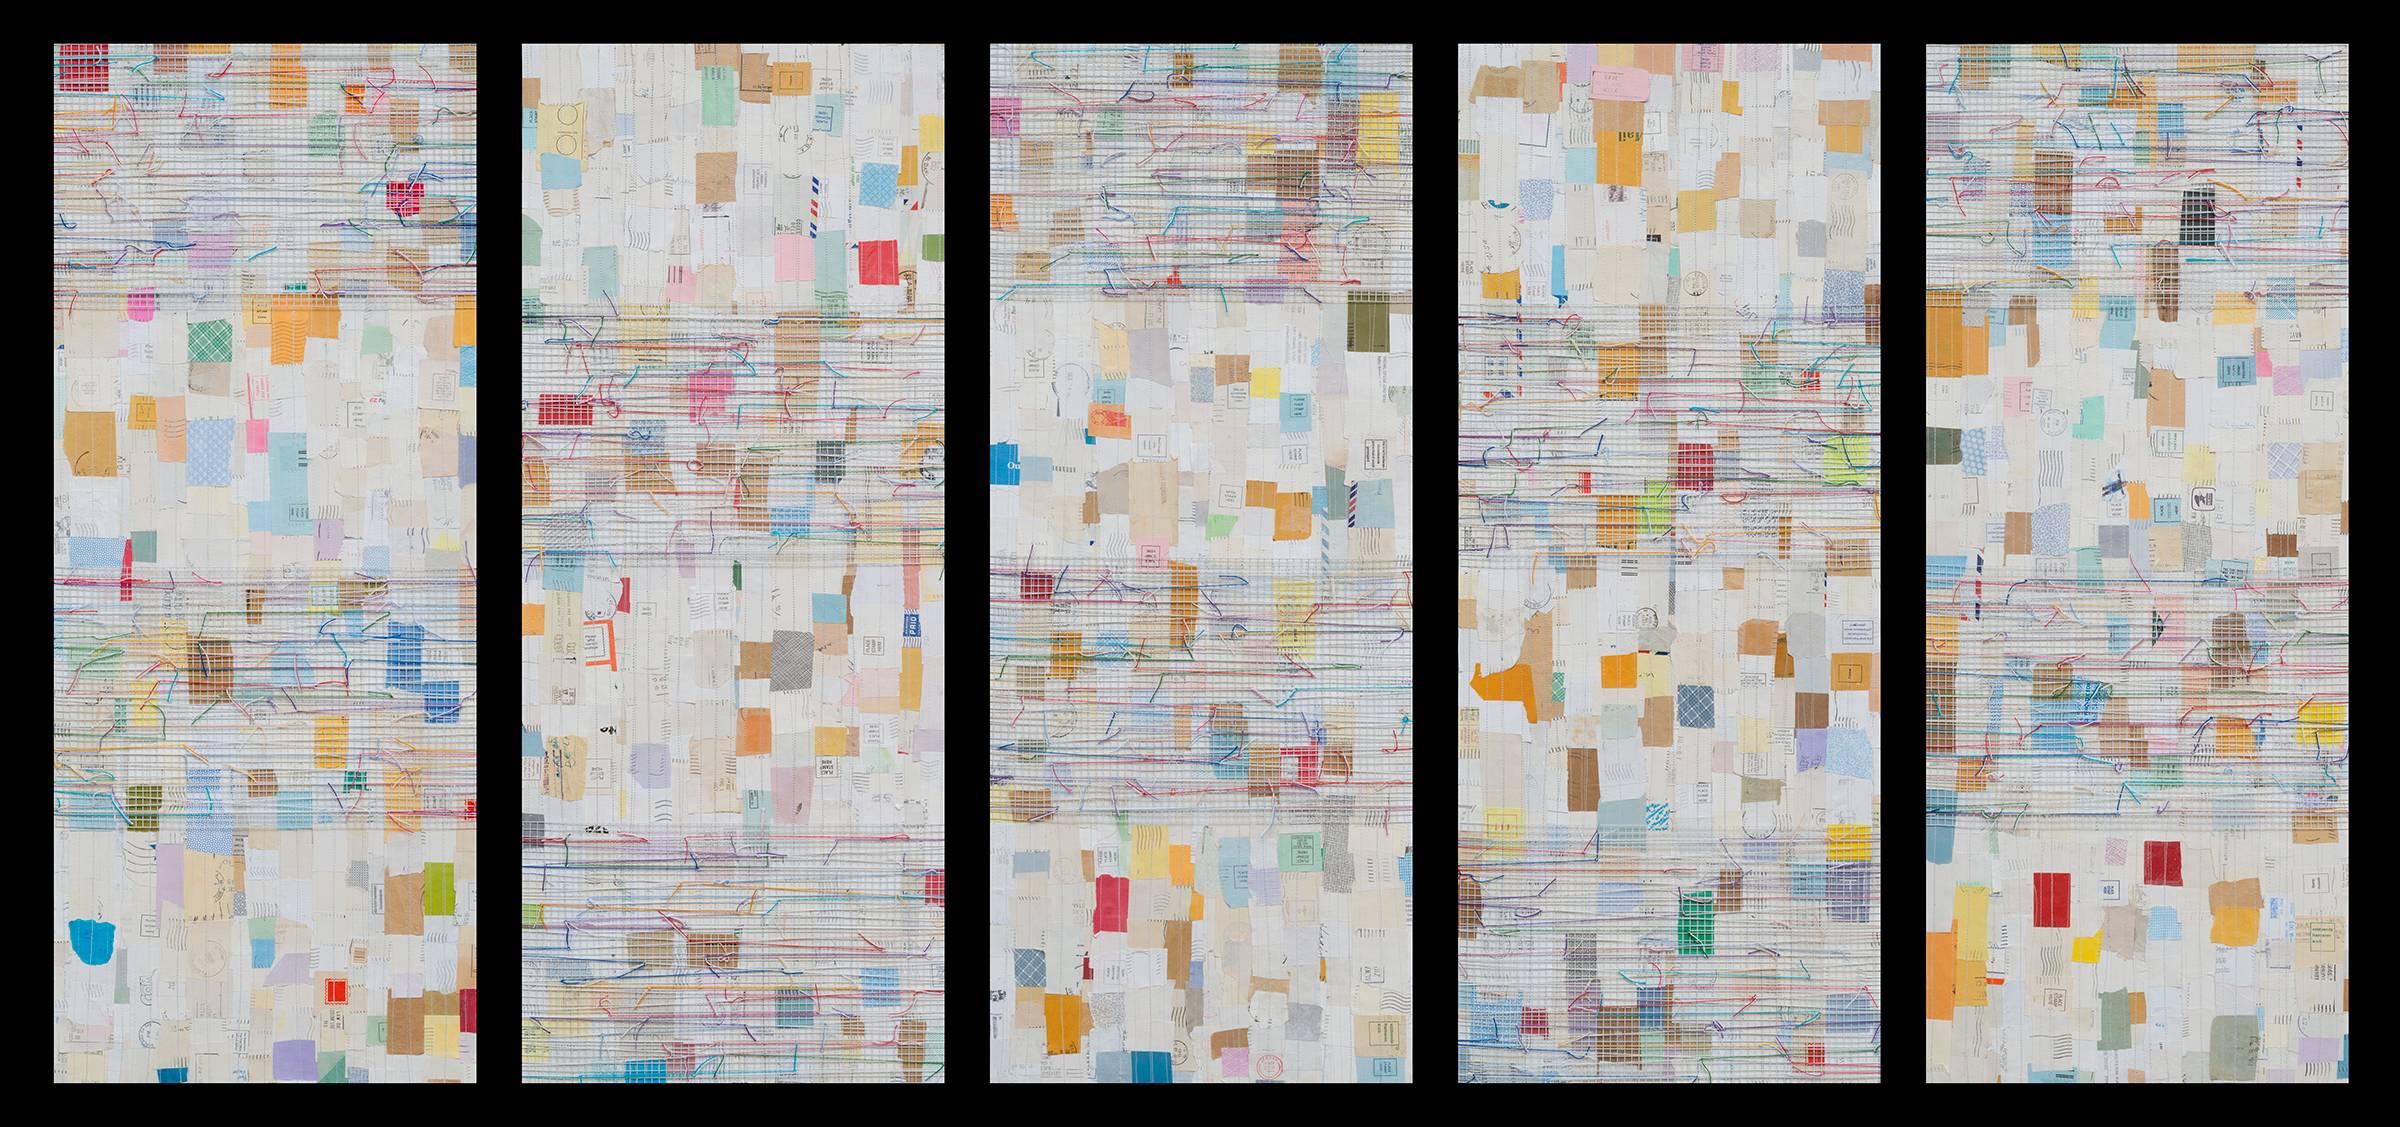 "Notes", Wall Sculpture Composed of Postmarked Envelope Paper and Mixed Media - Mixed Media Art by John Garrett